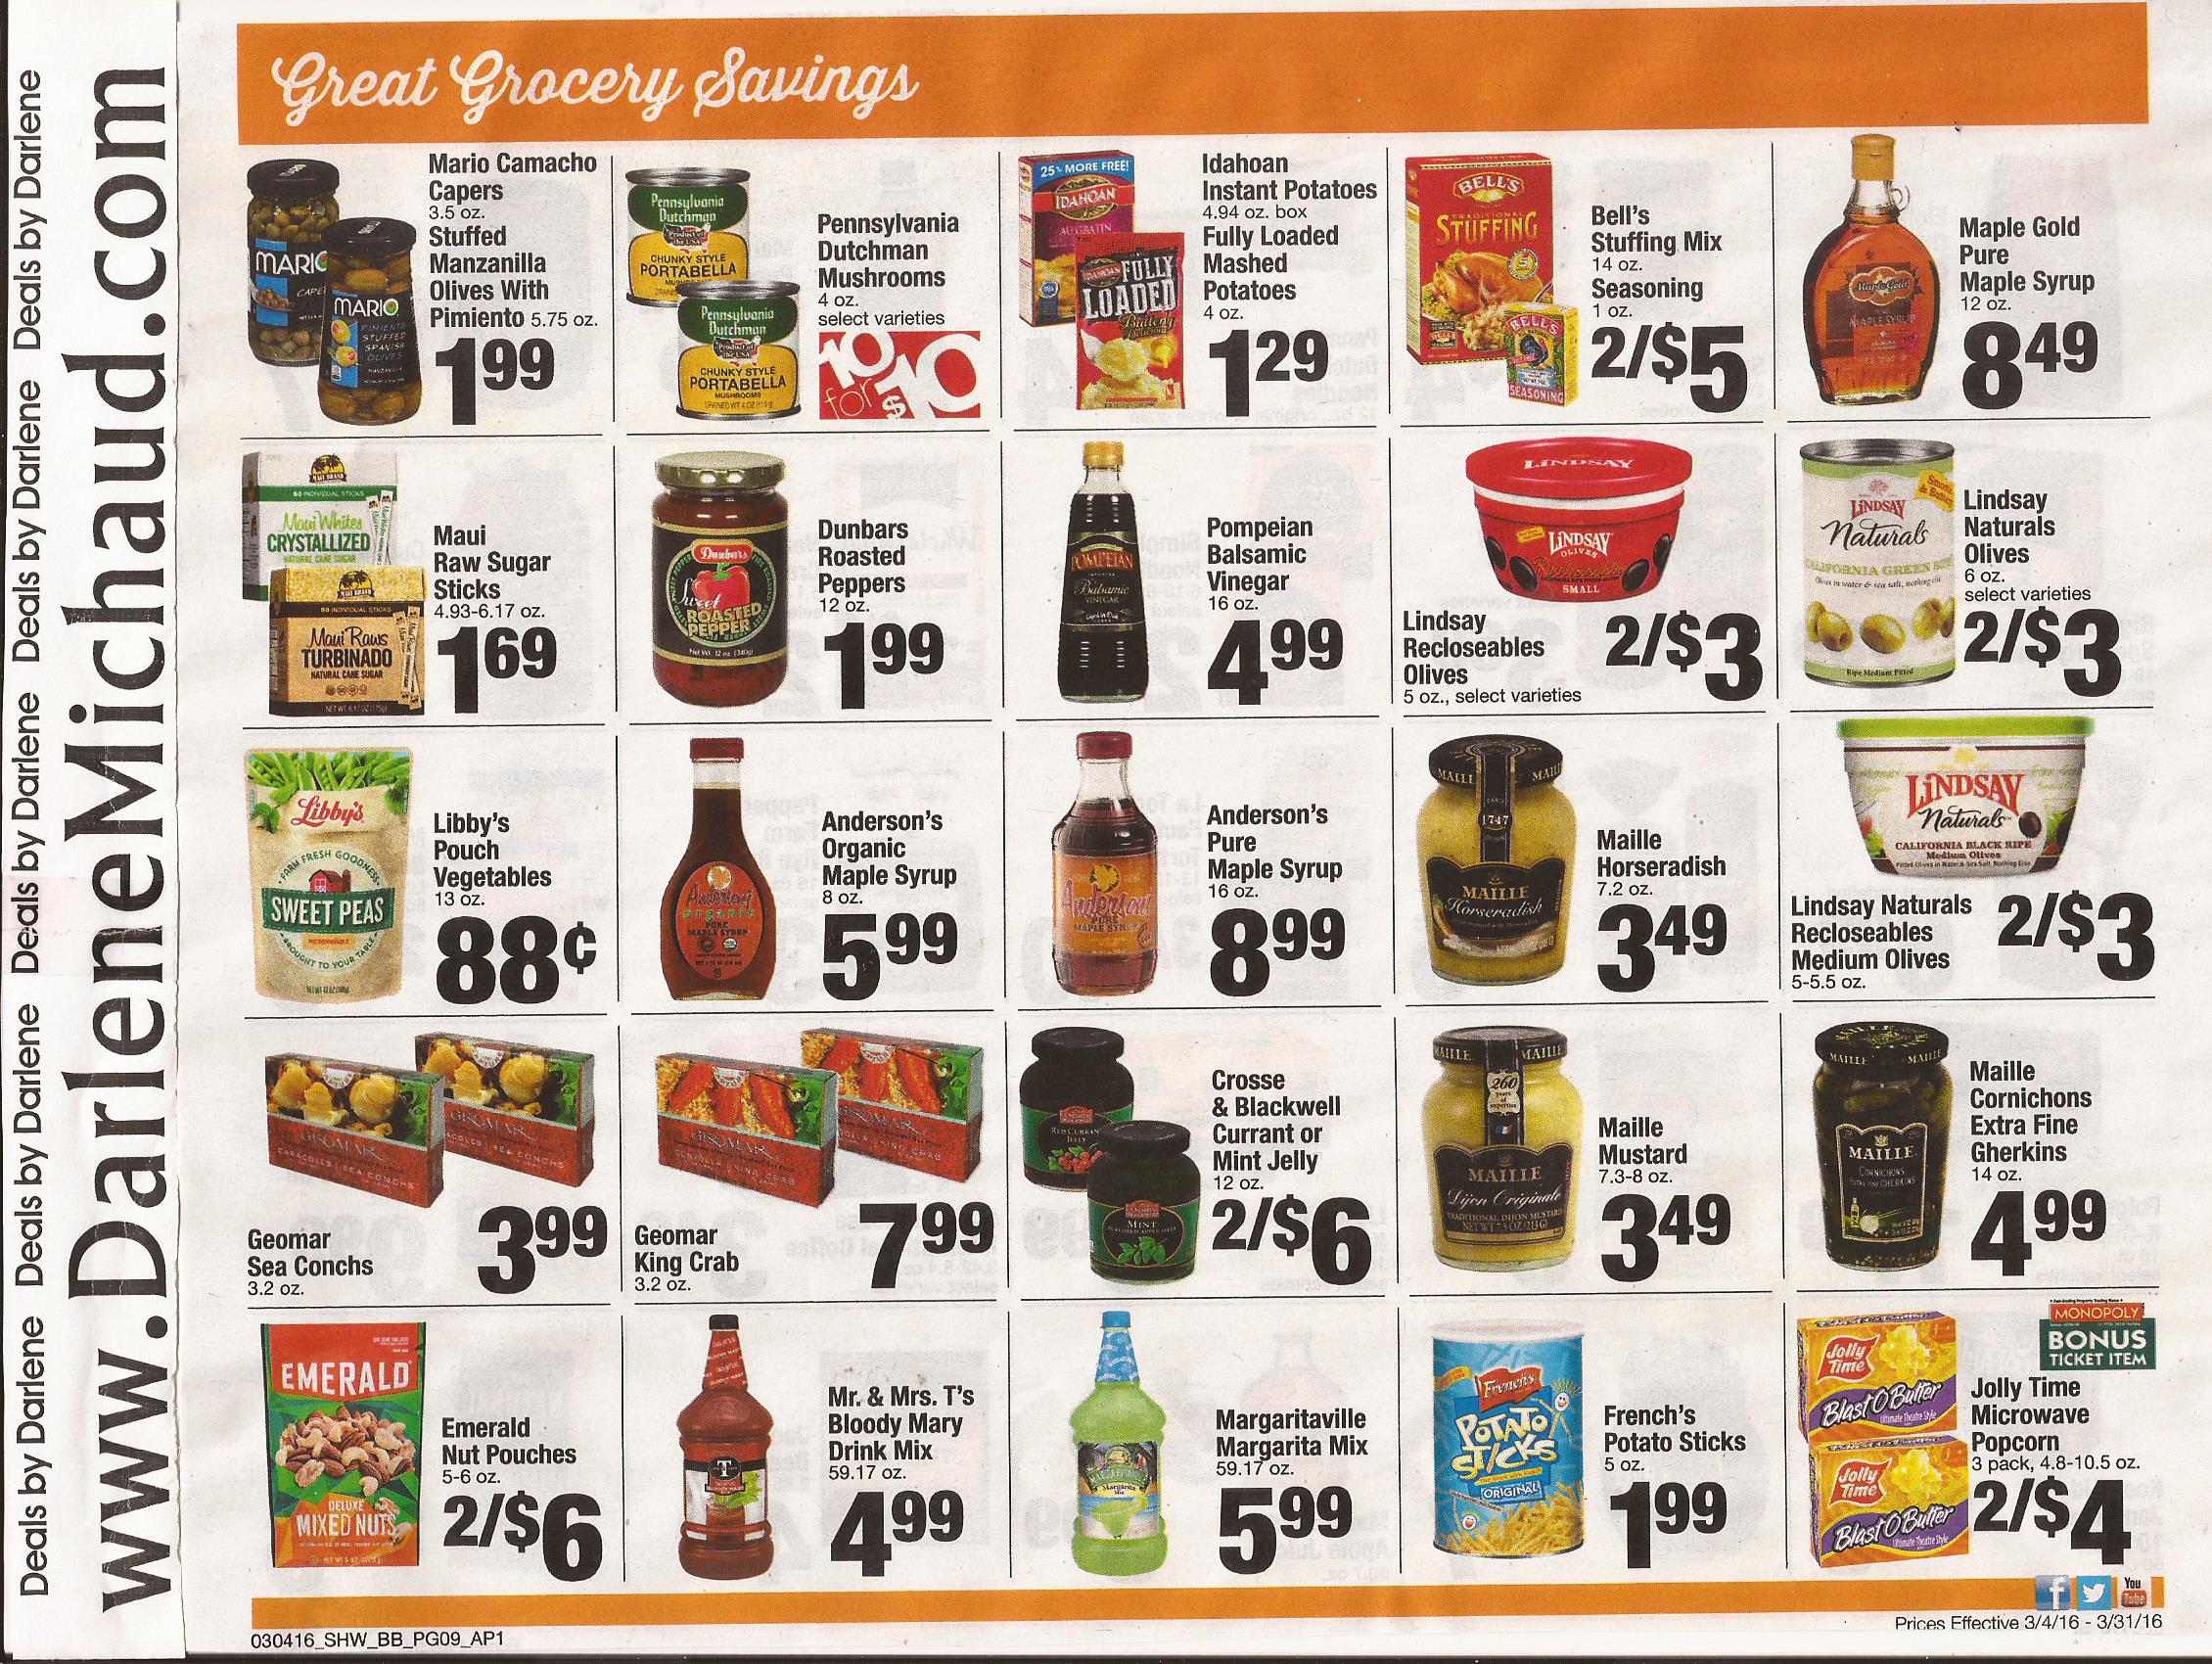 shaws-big-book-savings-march-4-march-31-page-09